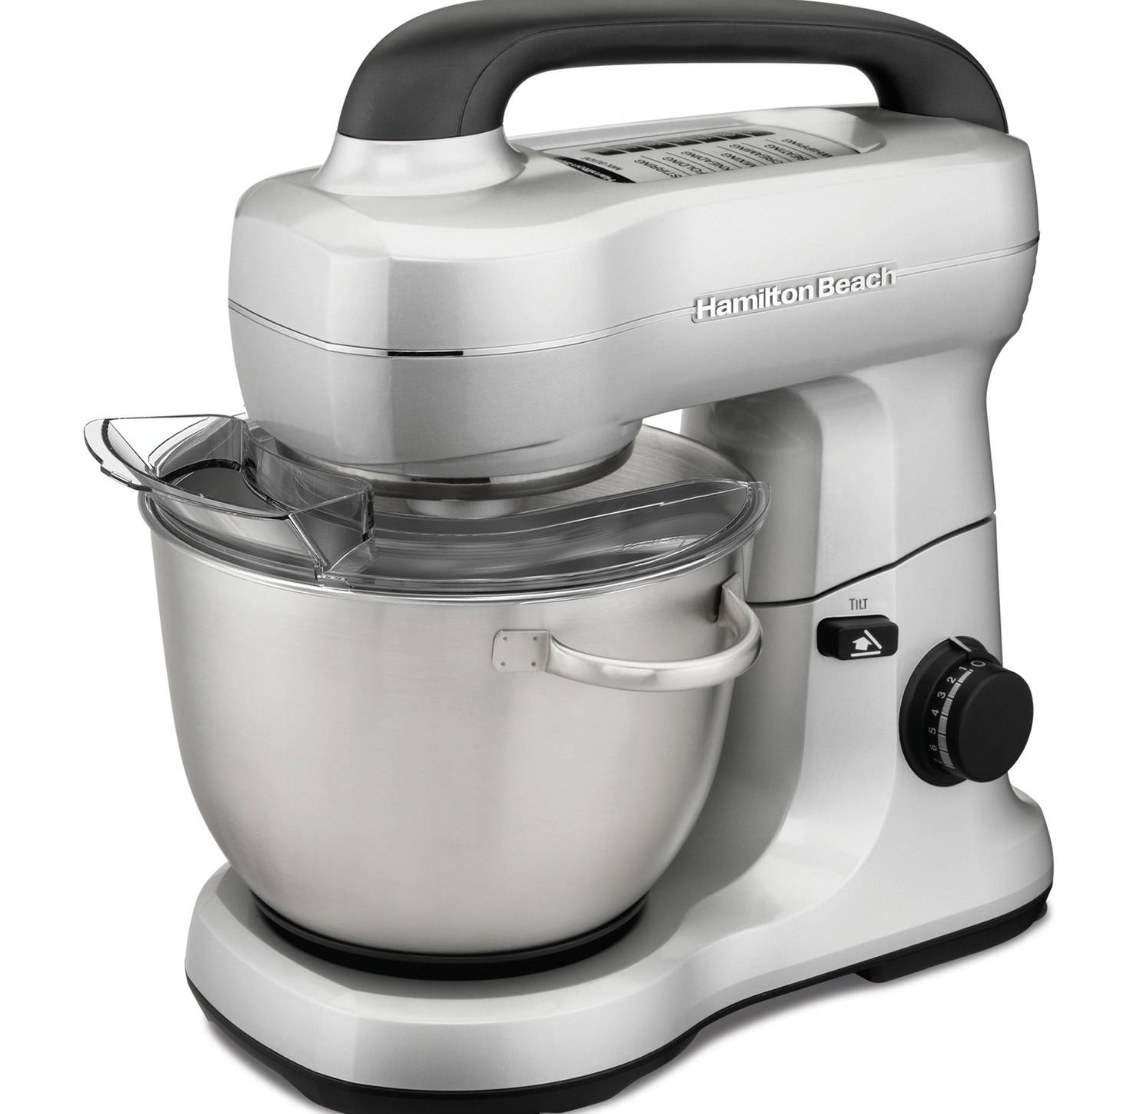 The stand mixer in silver